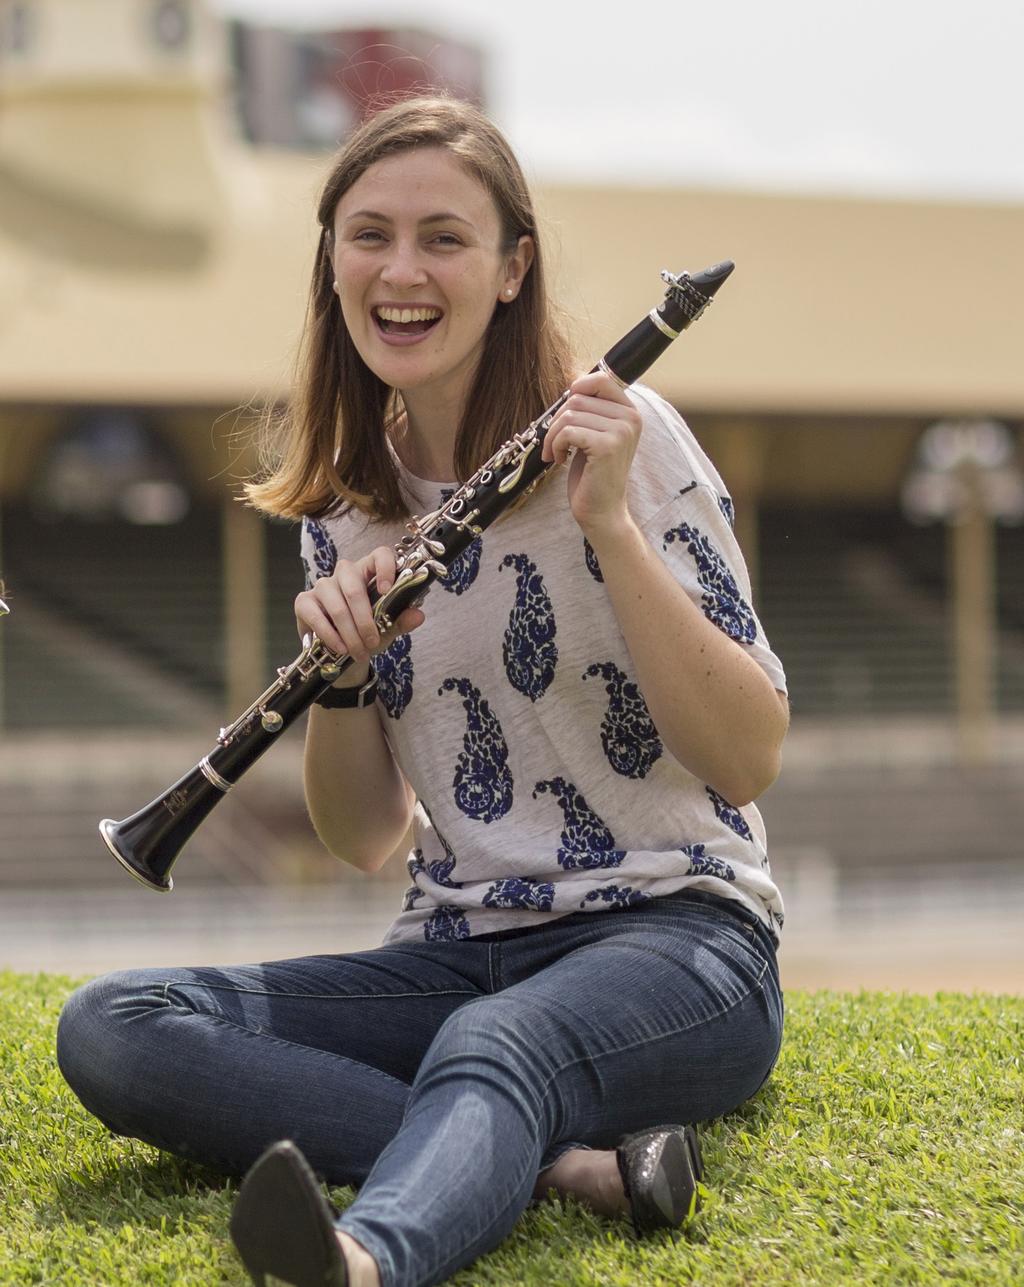 Queensland Youth Symphony (QYS) The Queensland Youth Symphony is widely recognised as a world-class youth orchestra and is the leading ensemble of Queensland Youth Orchestras.